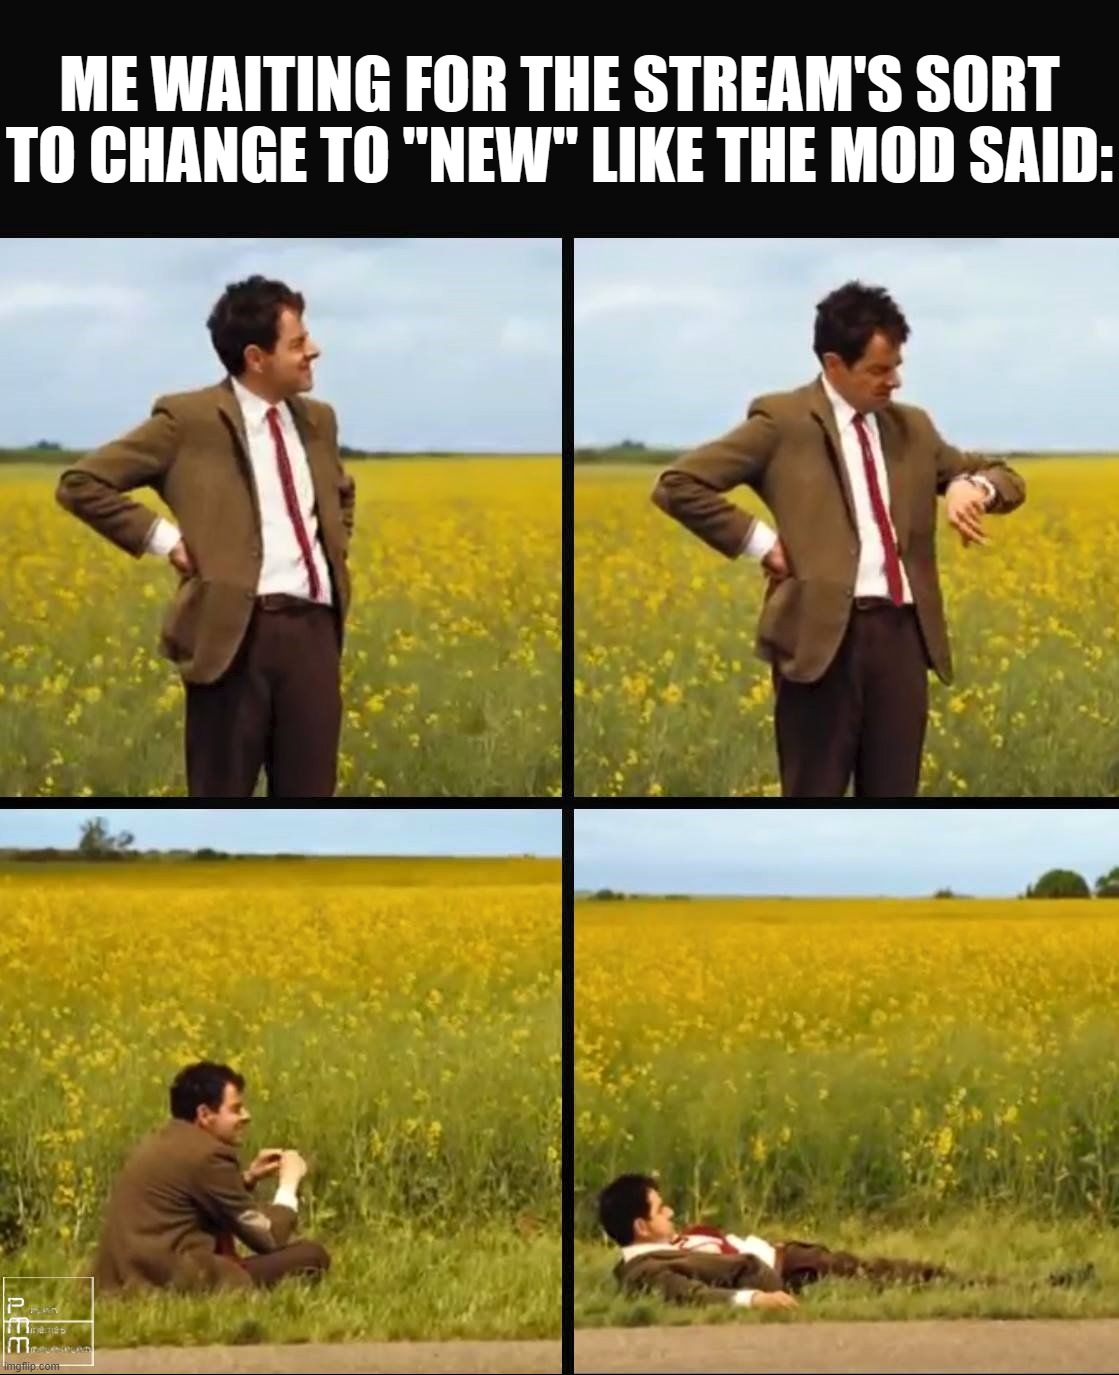 Mr bean waiting | ME WAITING FOR THE STREAM'S SORT TO CHANGE TO "NEW" LIKE THE MOD SAID: | image tagged in mr bean waiting | made w/ Imgflip meme maker